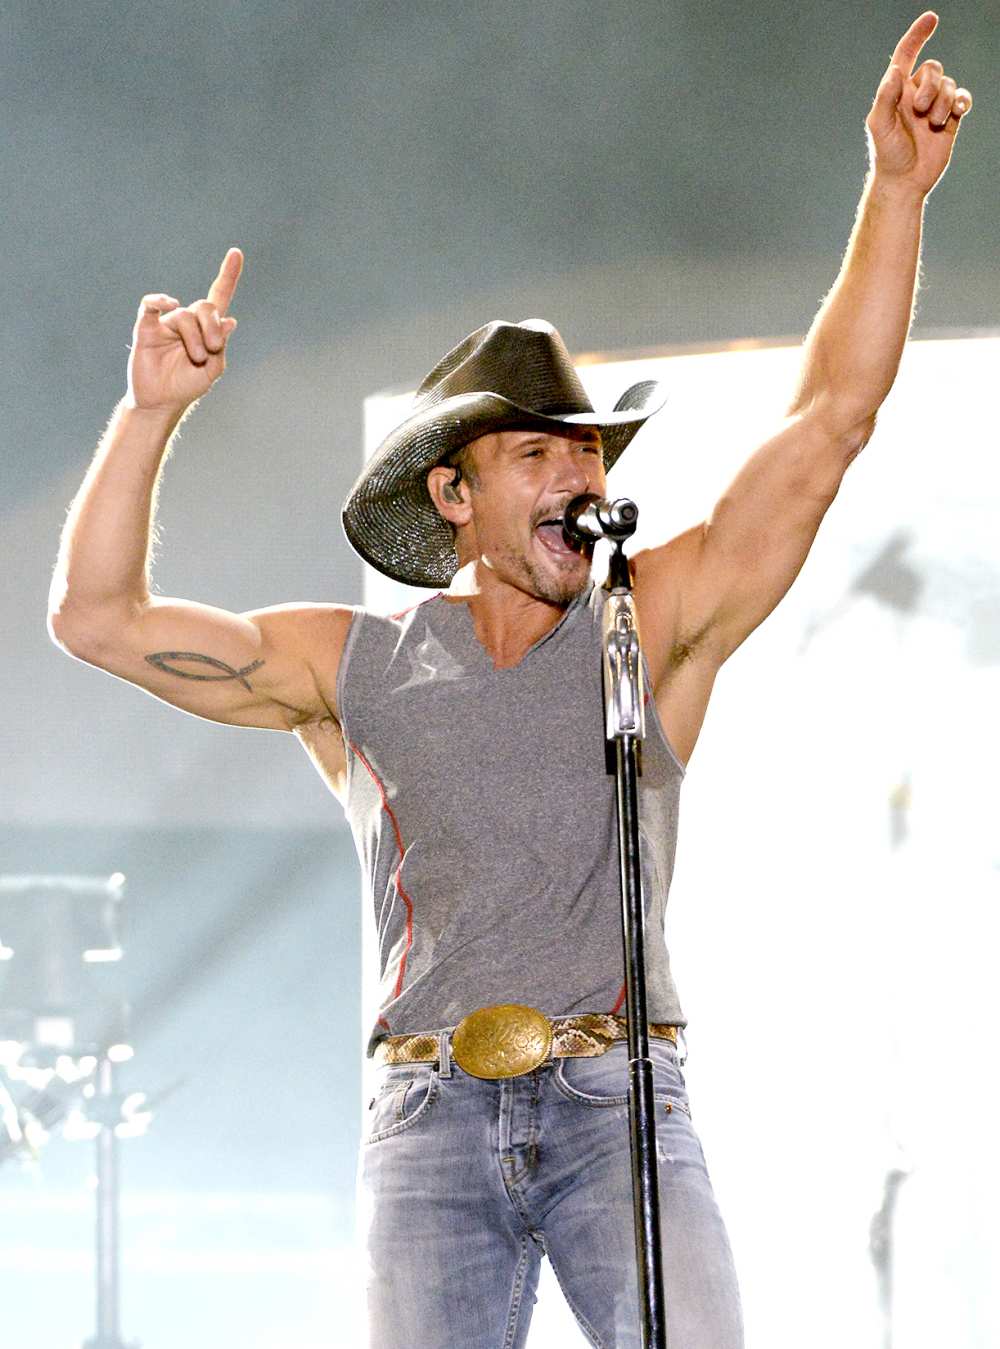 Tim McGraw performs onstage during the Tortuga Music Festival on April 16, 2016 in Fort Lauderdale, Florida.